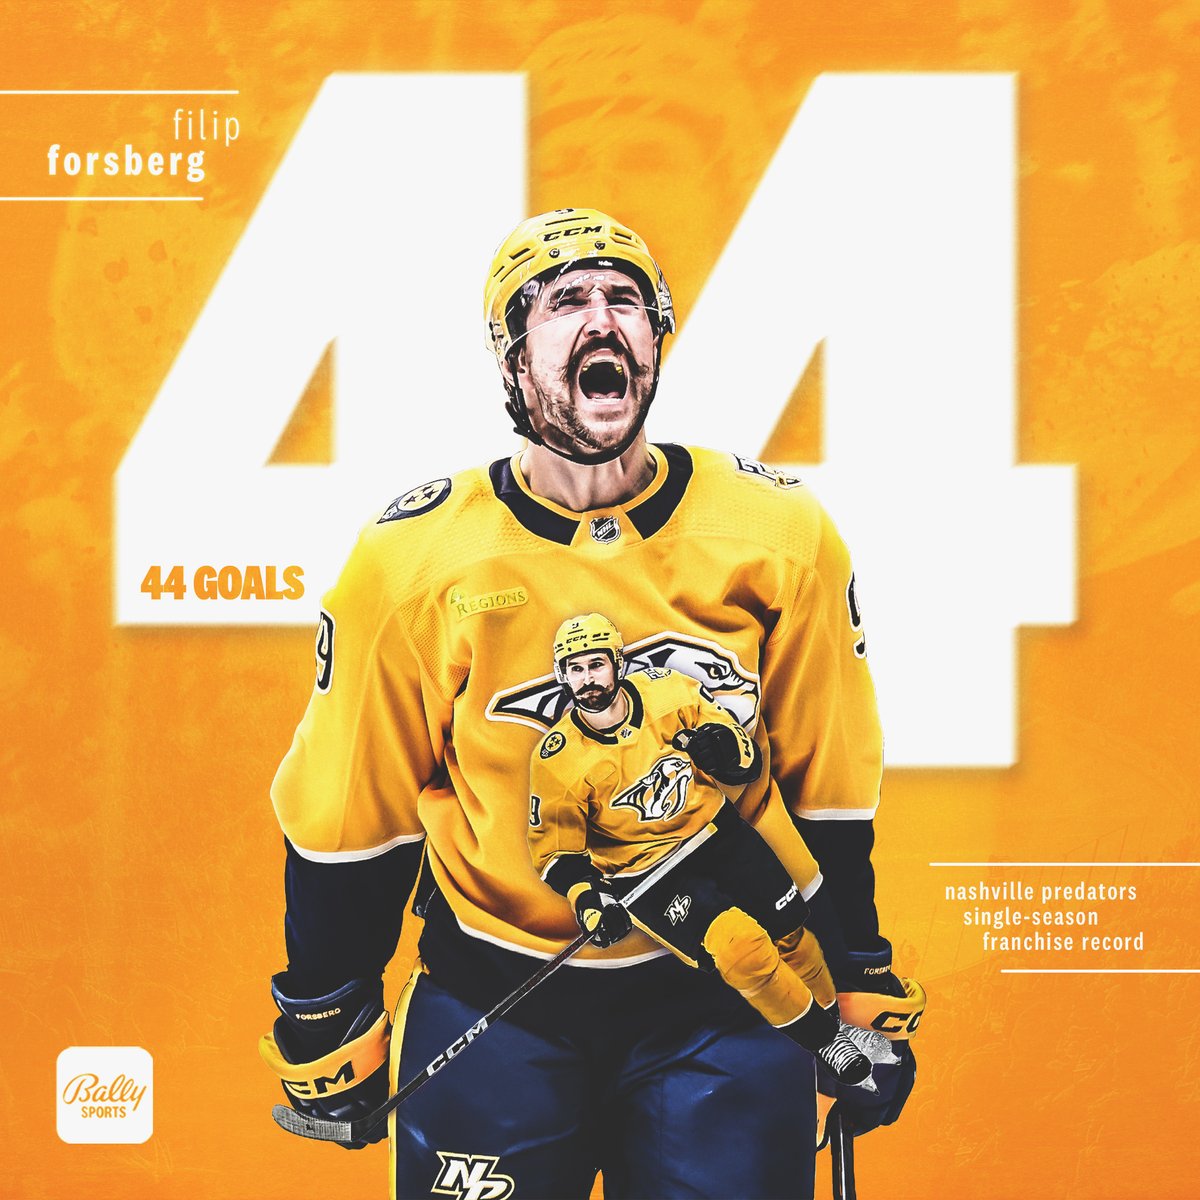 𝙁𝙧𝙖𝙣𝙘𝙝𝙞𝙨𝙚 𝙃𝙞𝙨𝙩𝙤𝙧𝙮 𝙛𝙤𝙧 𝙁𝙞𝙡 🟡 Filip Forsberg now owns the @PredsNHL all-time records for career goals and goals in a single season. #Preds